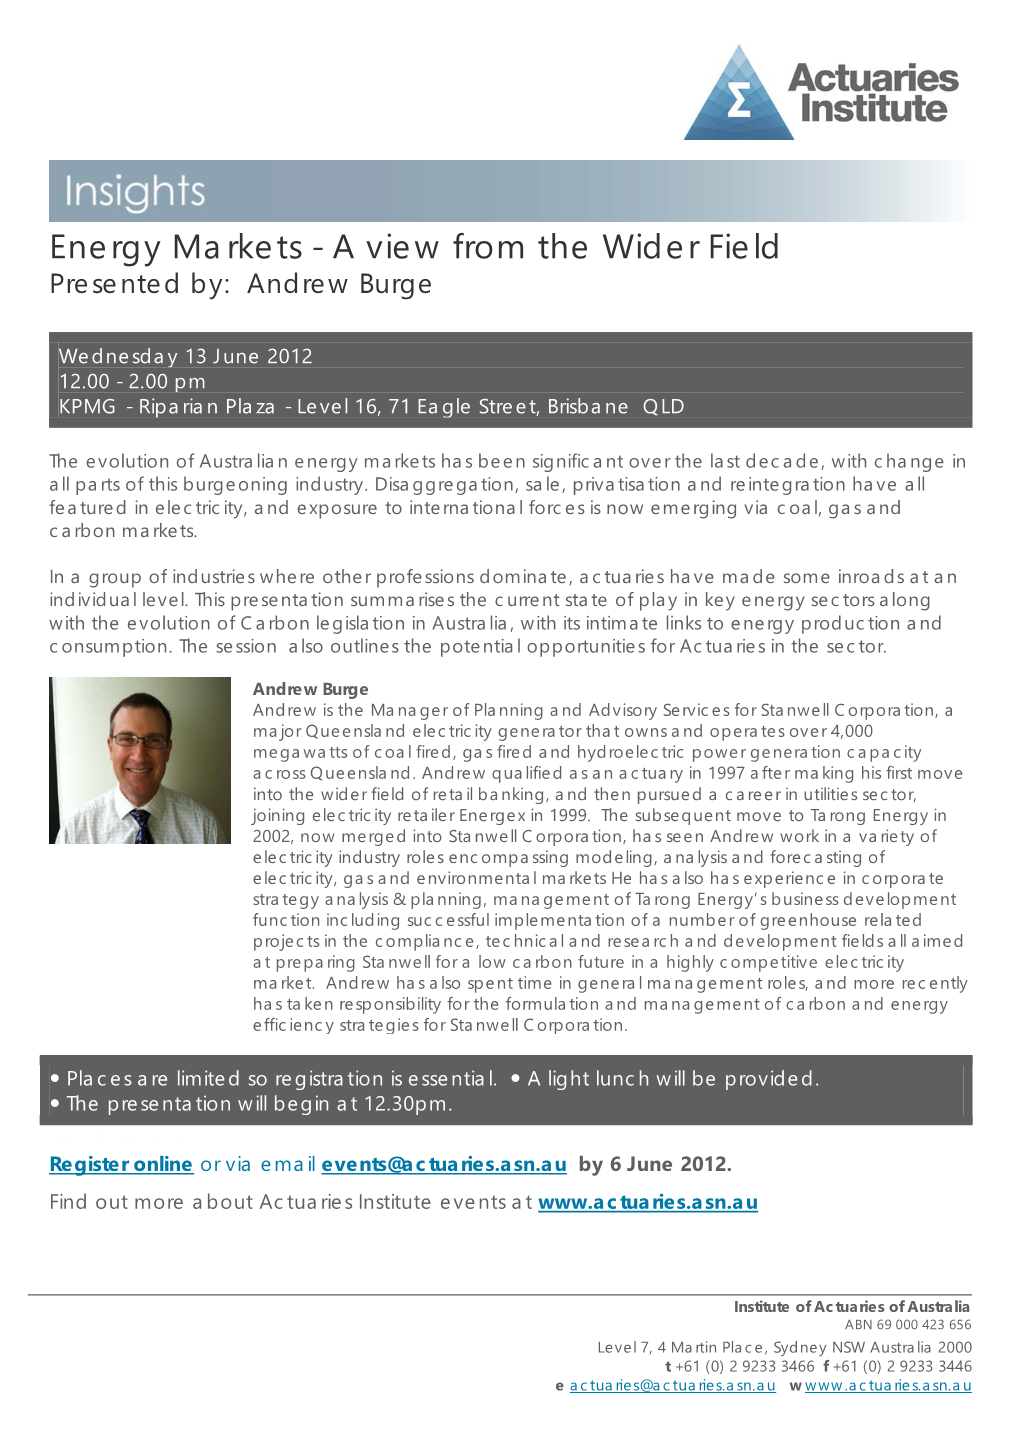 Energy Markets - a View from the Wider Field Presented By: Andrew Burge